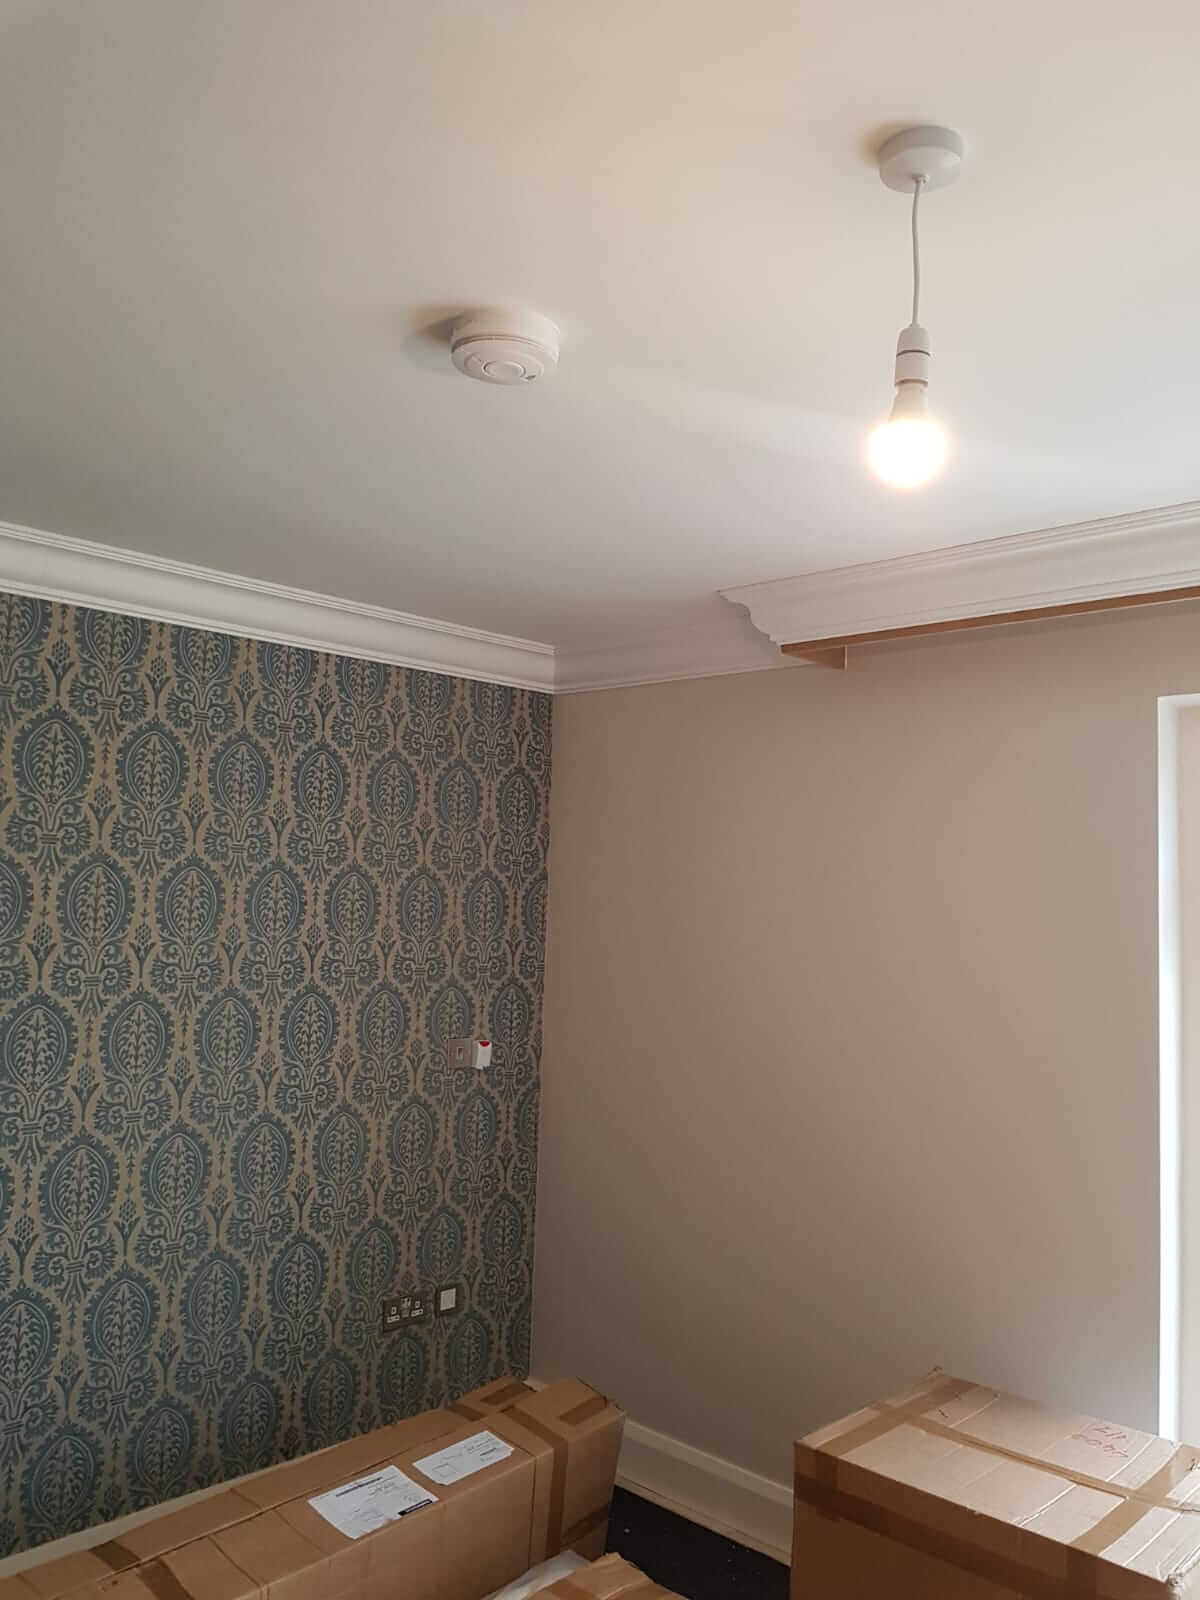 Charlotte - Modern Coving in a room with boxes